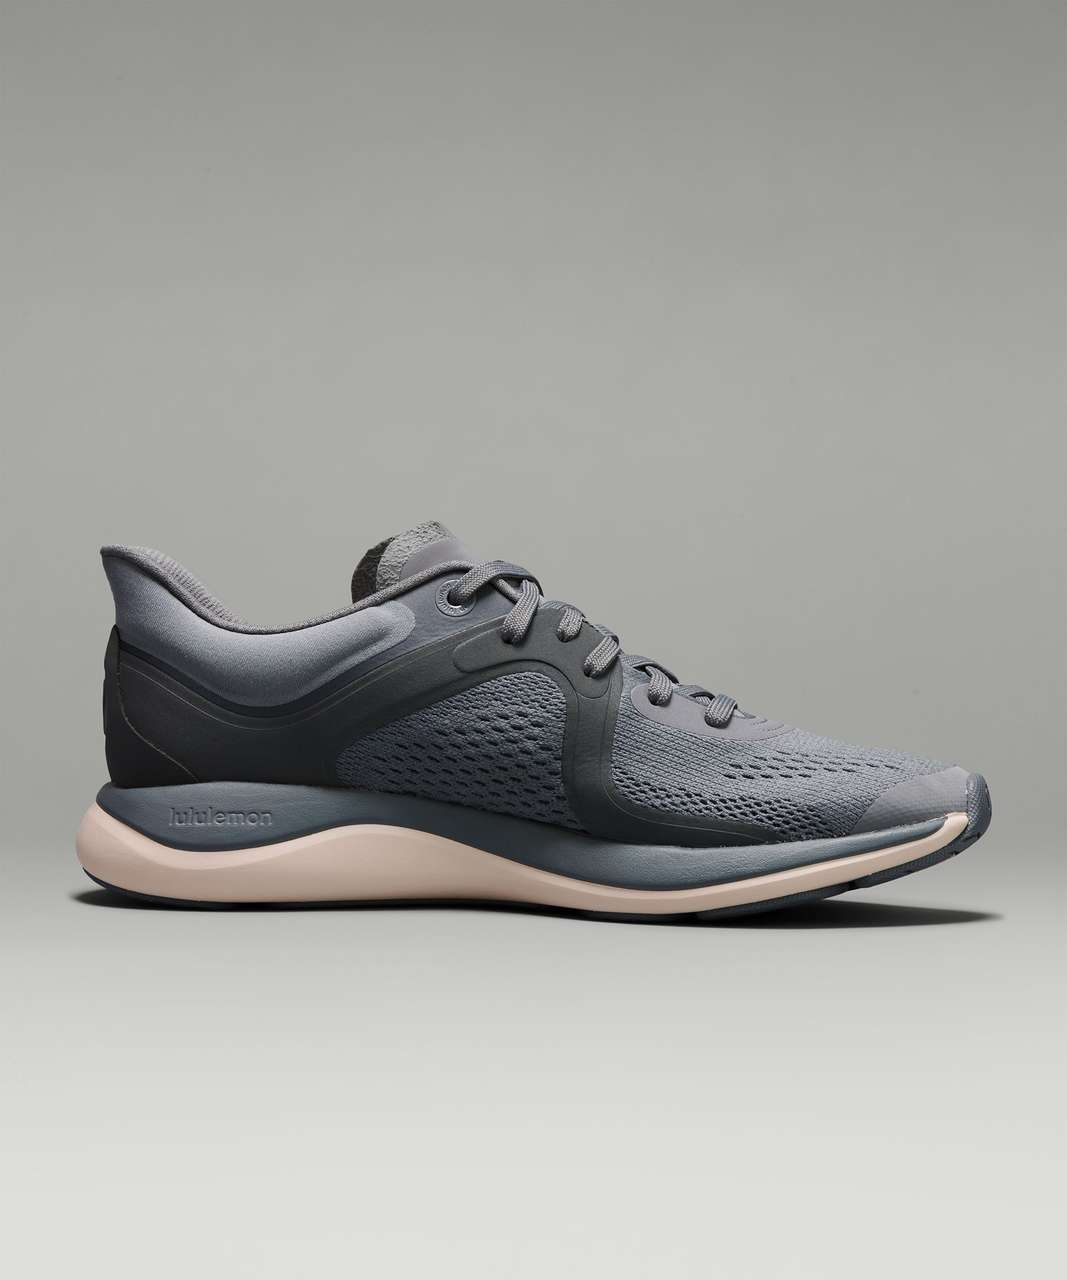 Lululemon Chargefeel Low Womens Workout Shoe - Anchor / Graphite Grey / Butter Pink